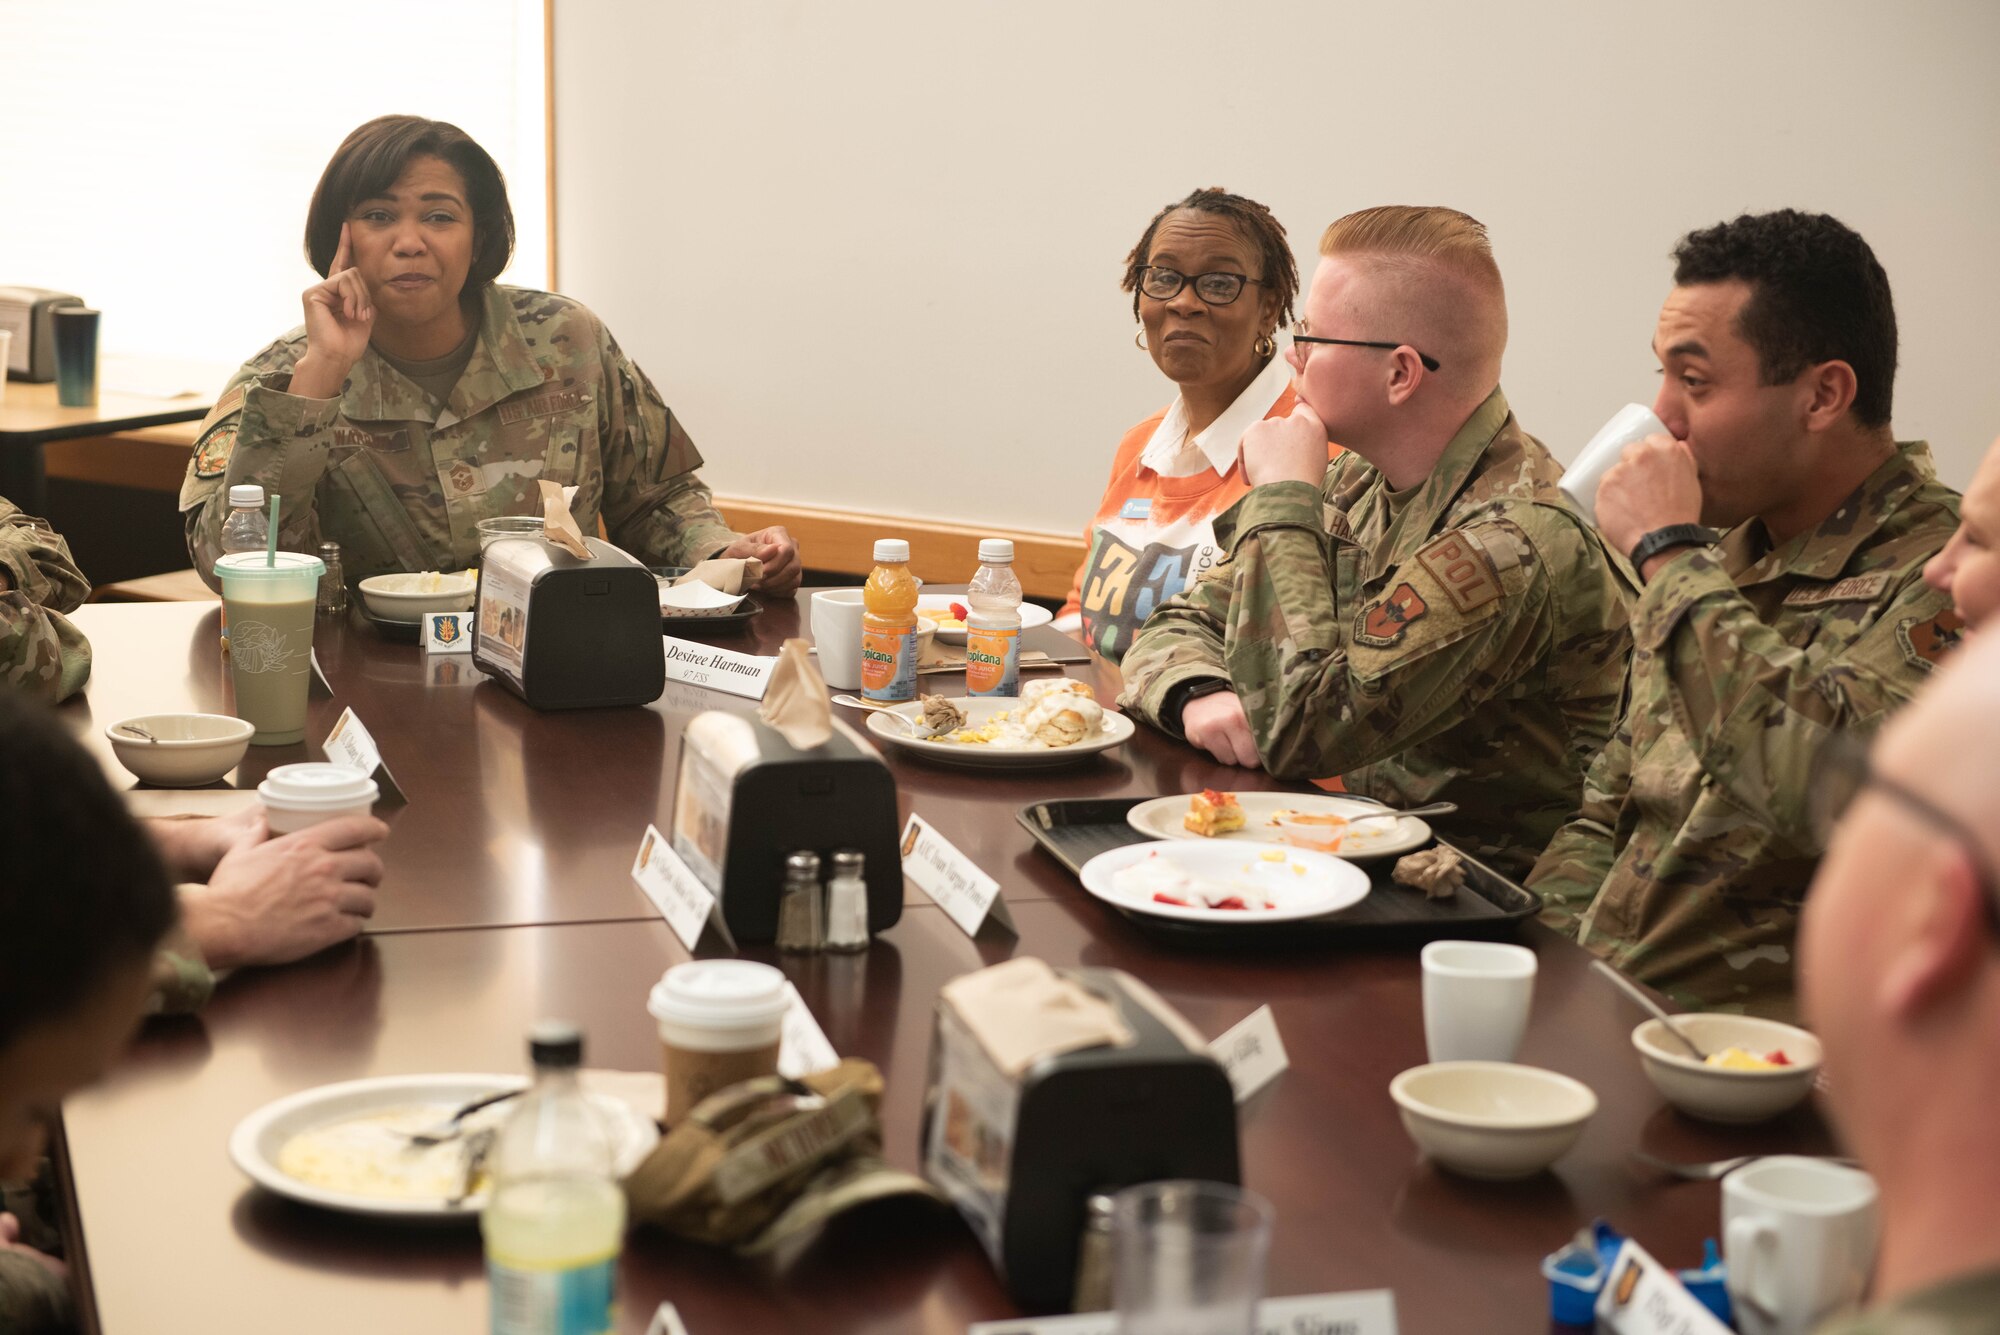 U.S. Air Force Chief Master Sgt. Adrienne Warren, 432nd Air Expeditionary Wing command chief, listens to 97th Air Mobility Wing Airmen at a breakfast at Altus Air Force Base, Oklahoma, Jan. 20, 2023. Base leaders chose to show Warren facilities like the Child Development Center and the Military and Family Readiness center to demonstrate their dedication to creating a base where families can thrive. (U.S. Air Force photo by 2nd Lt. Charlie Nichols)